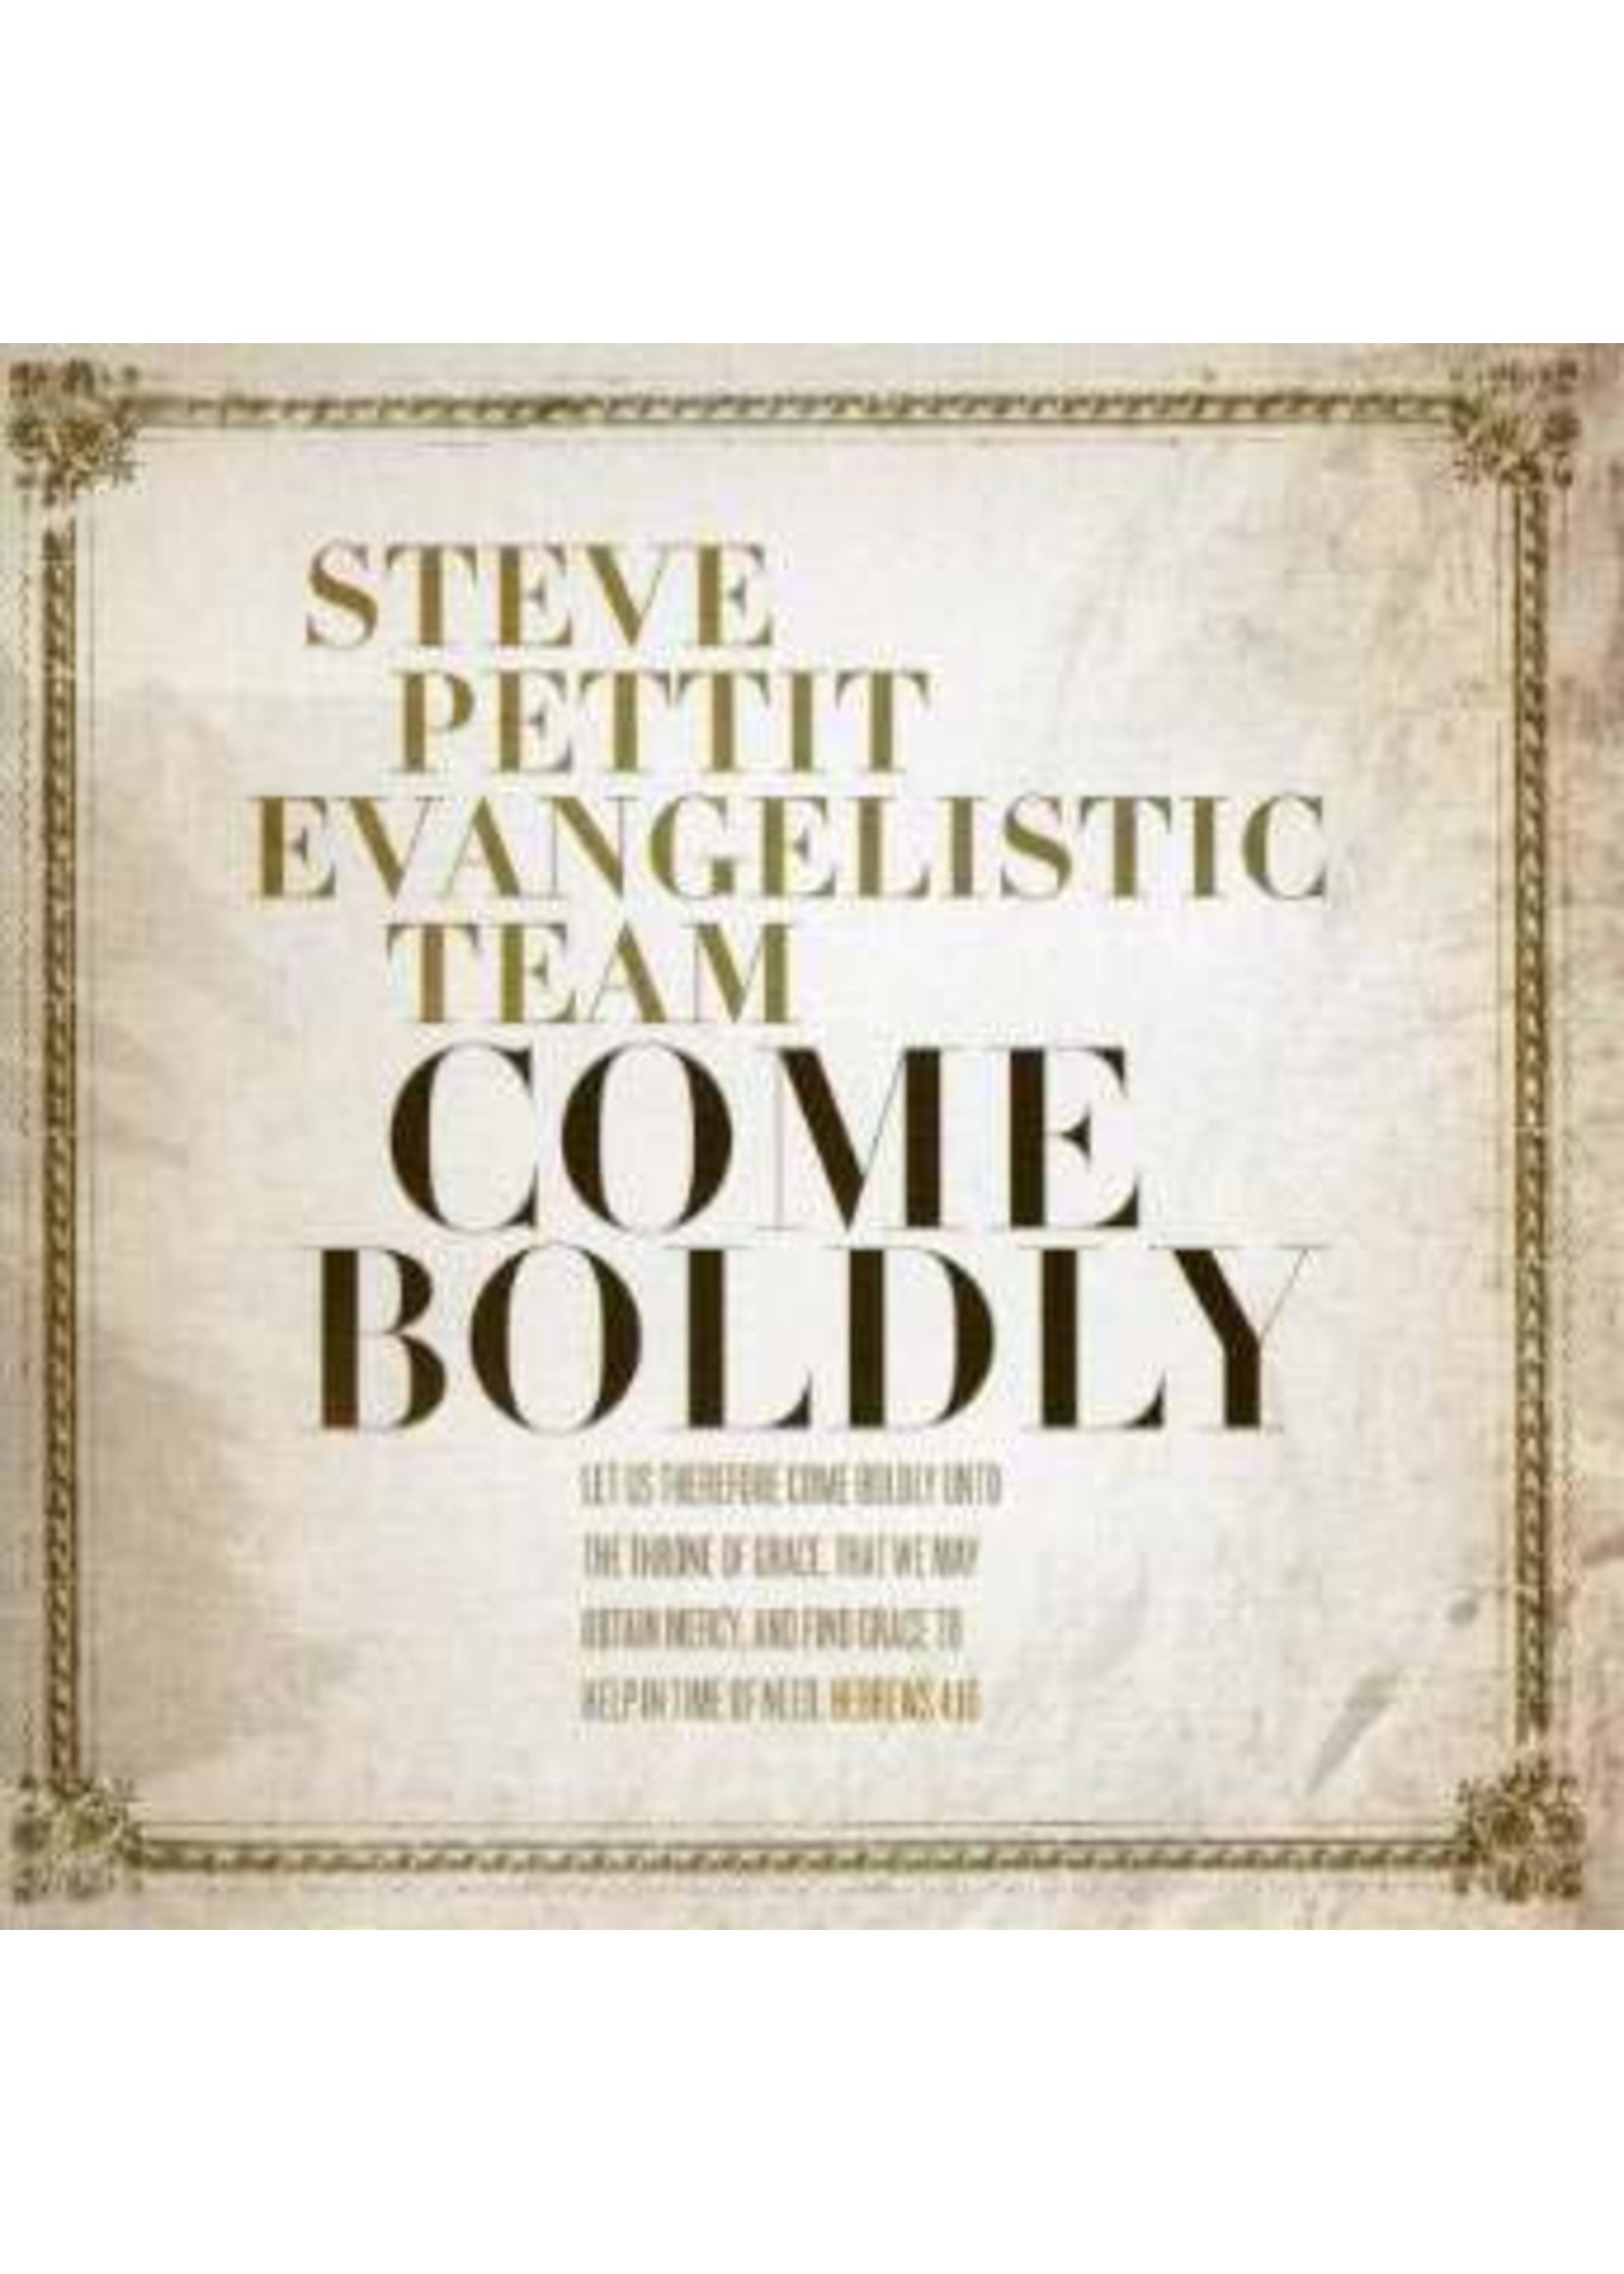 Come Boldly CD (Pettit Team)